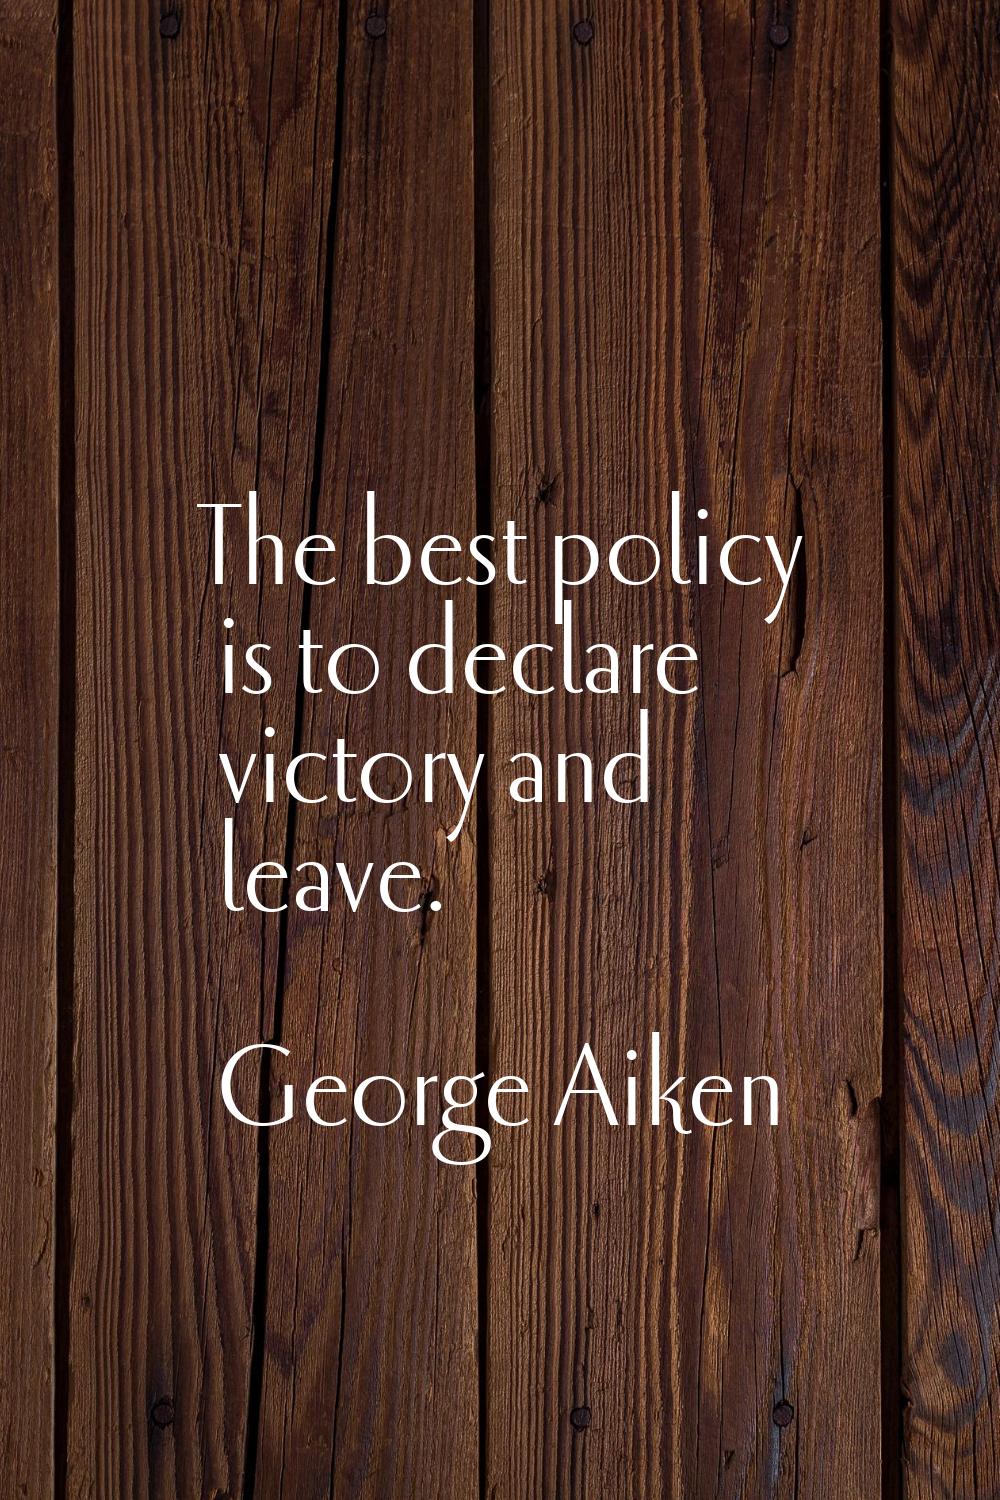 The best policy is to declare victory and leave.